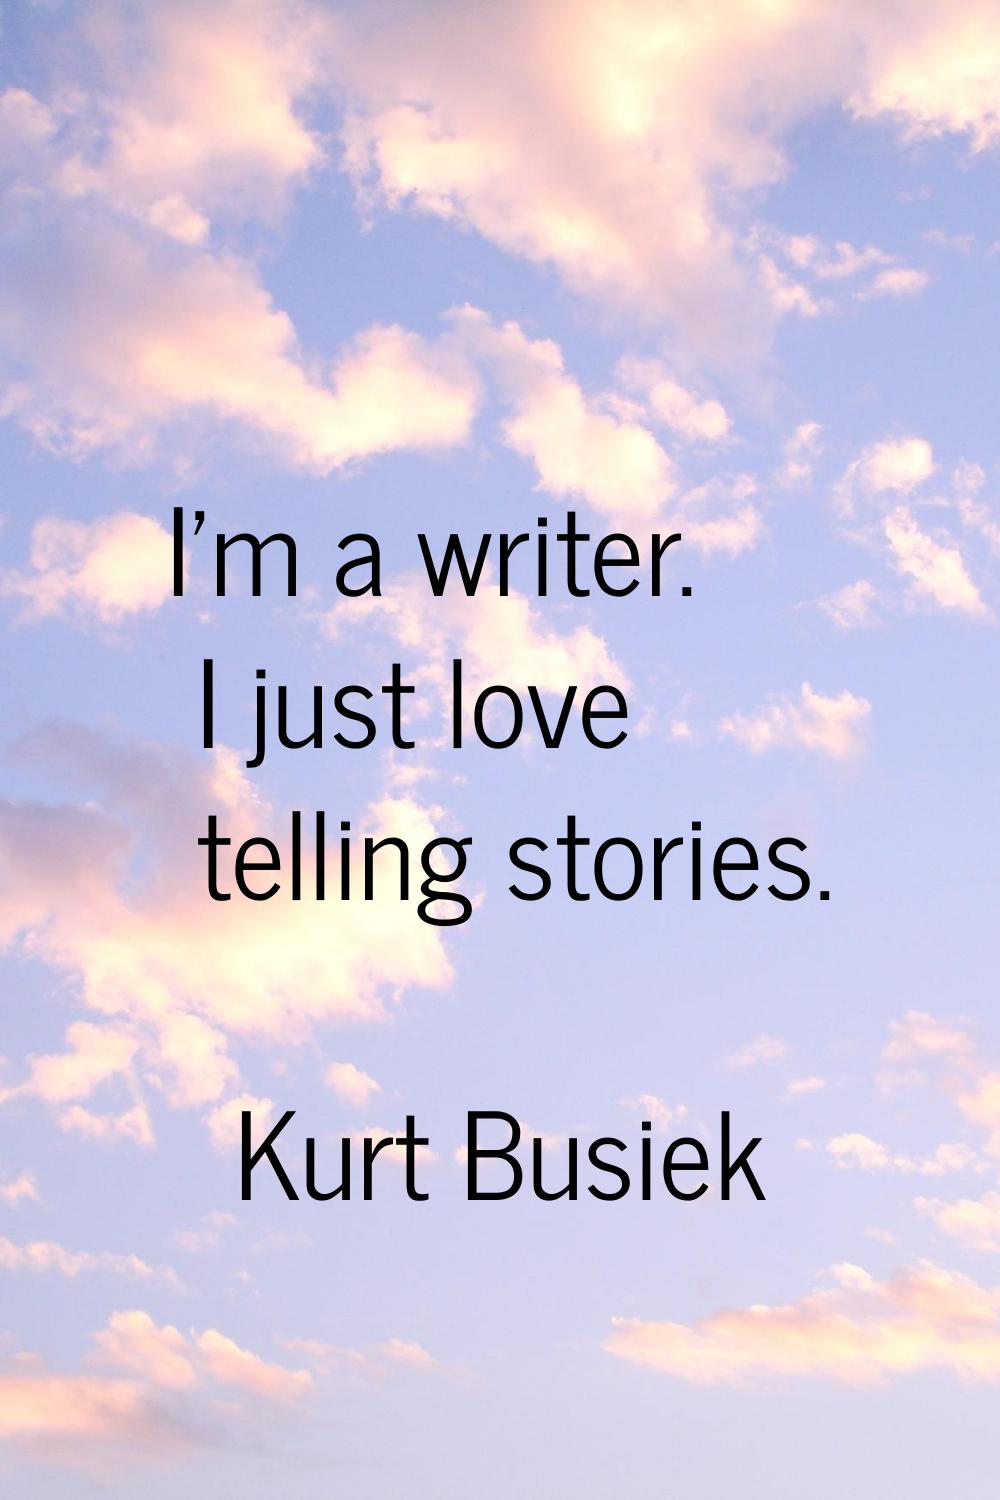 I'm a writer. I just love telling stories.